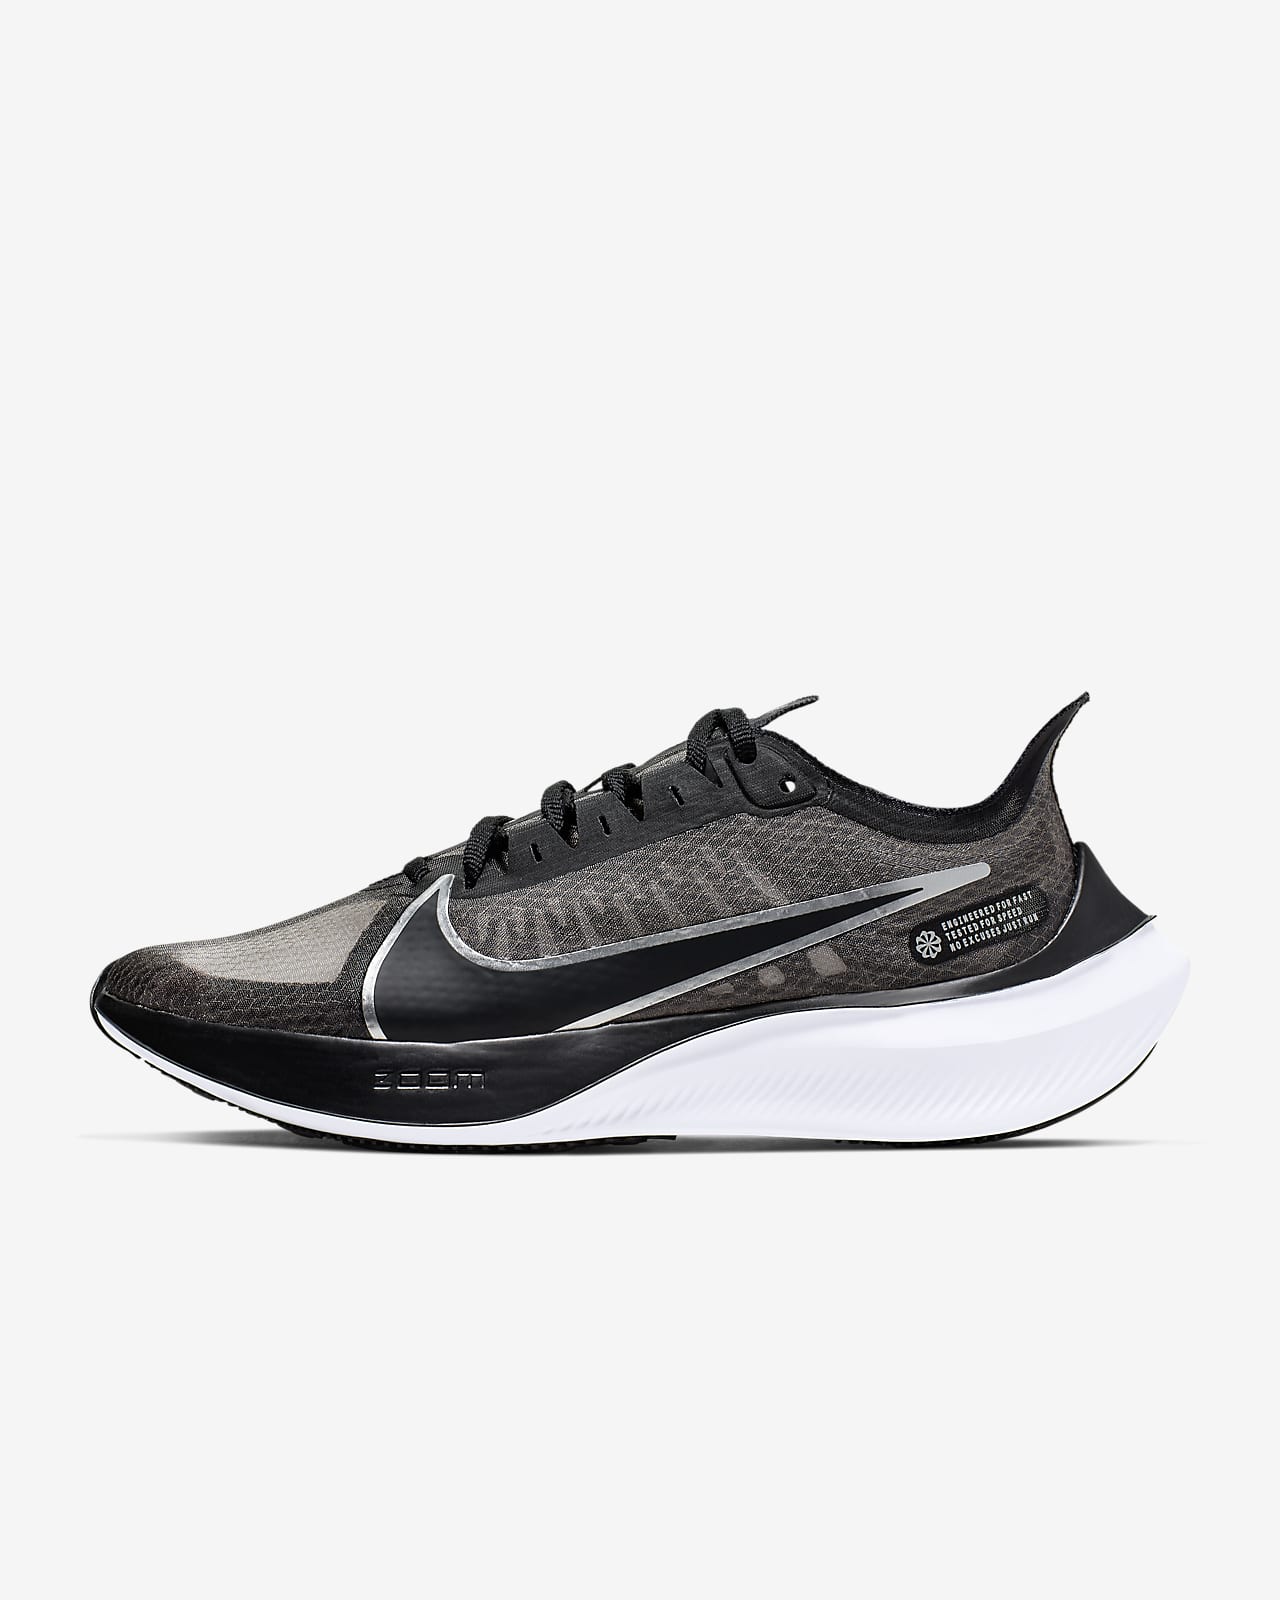 nike zoom gravity 2 review